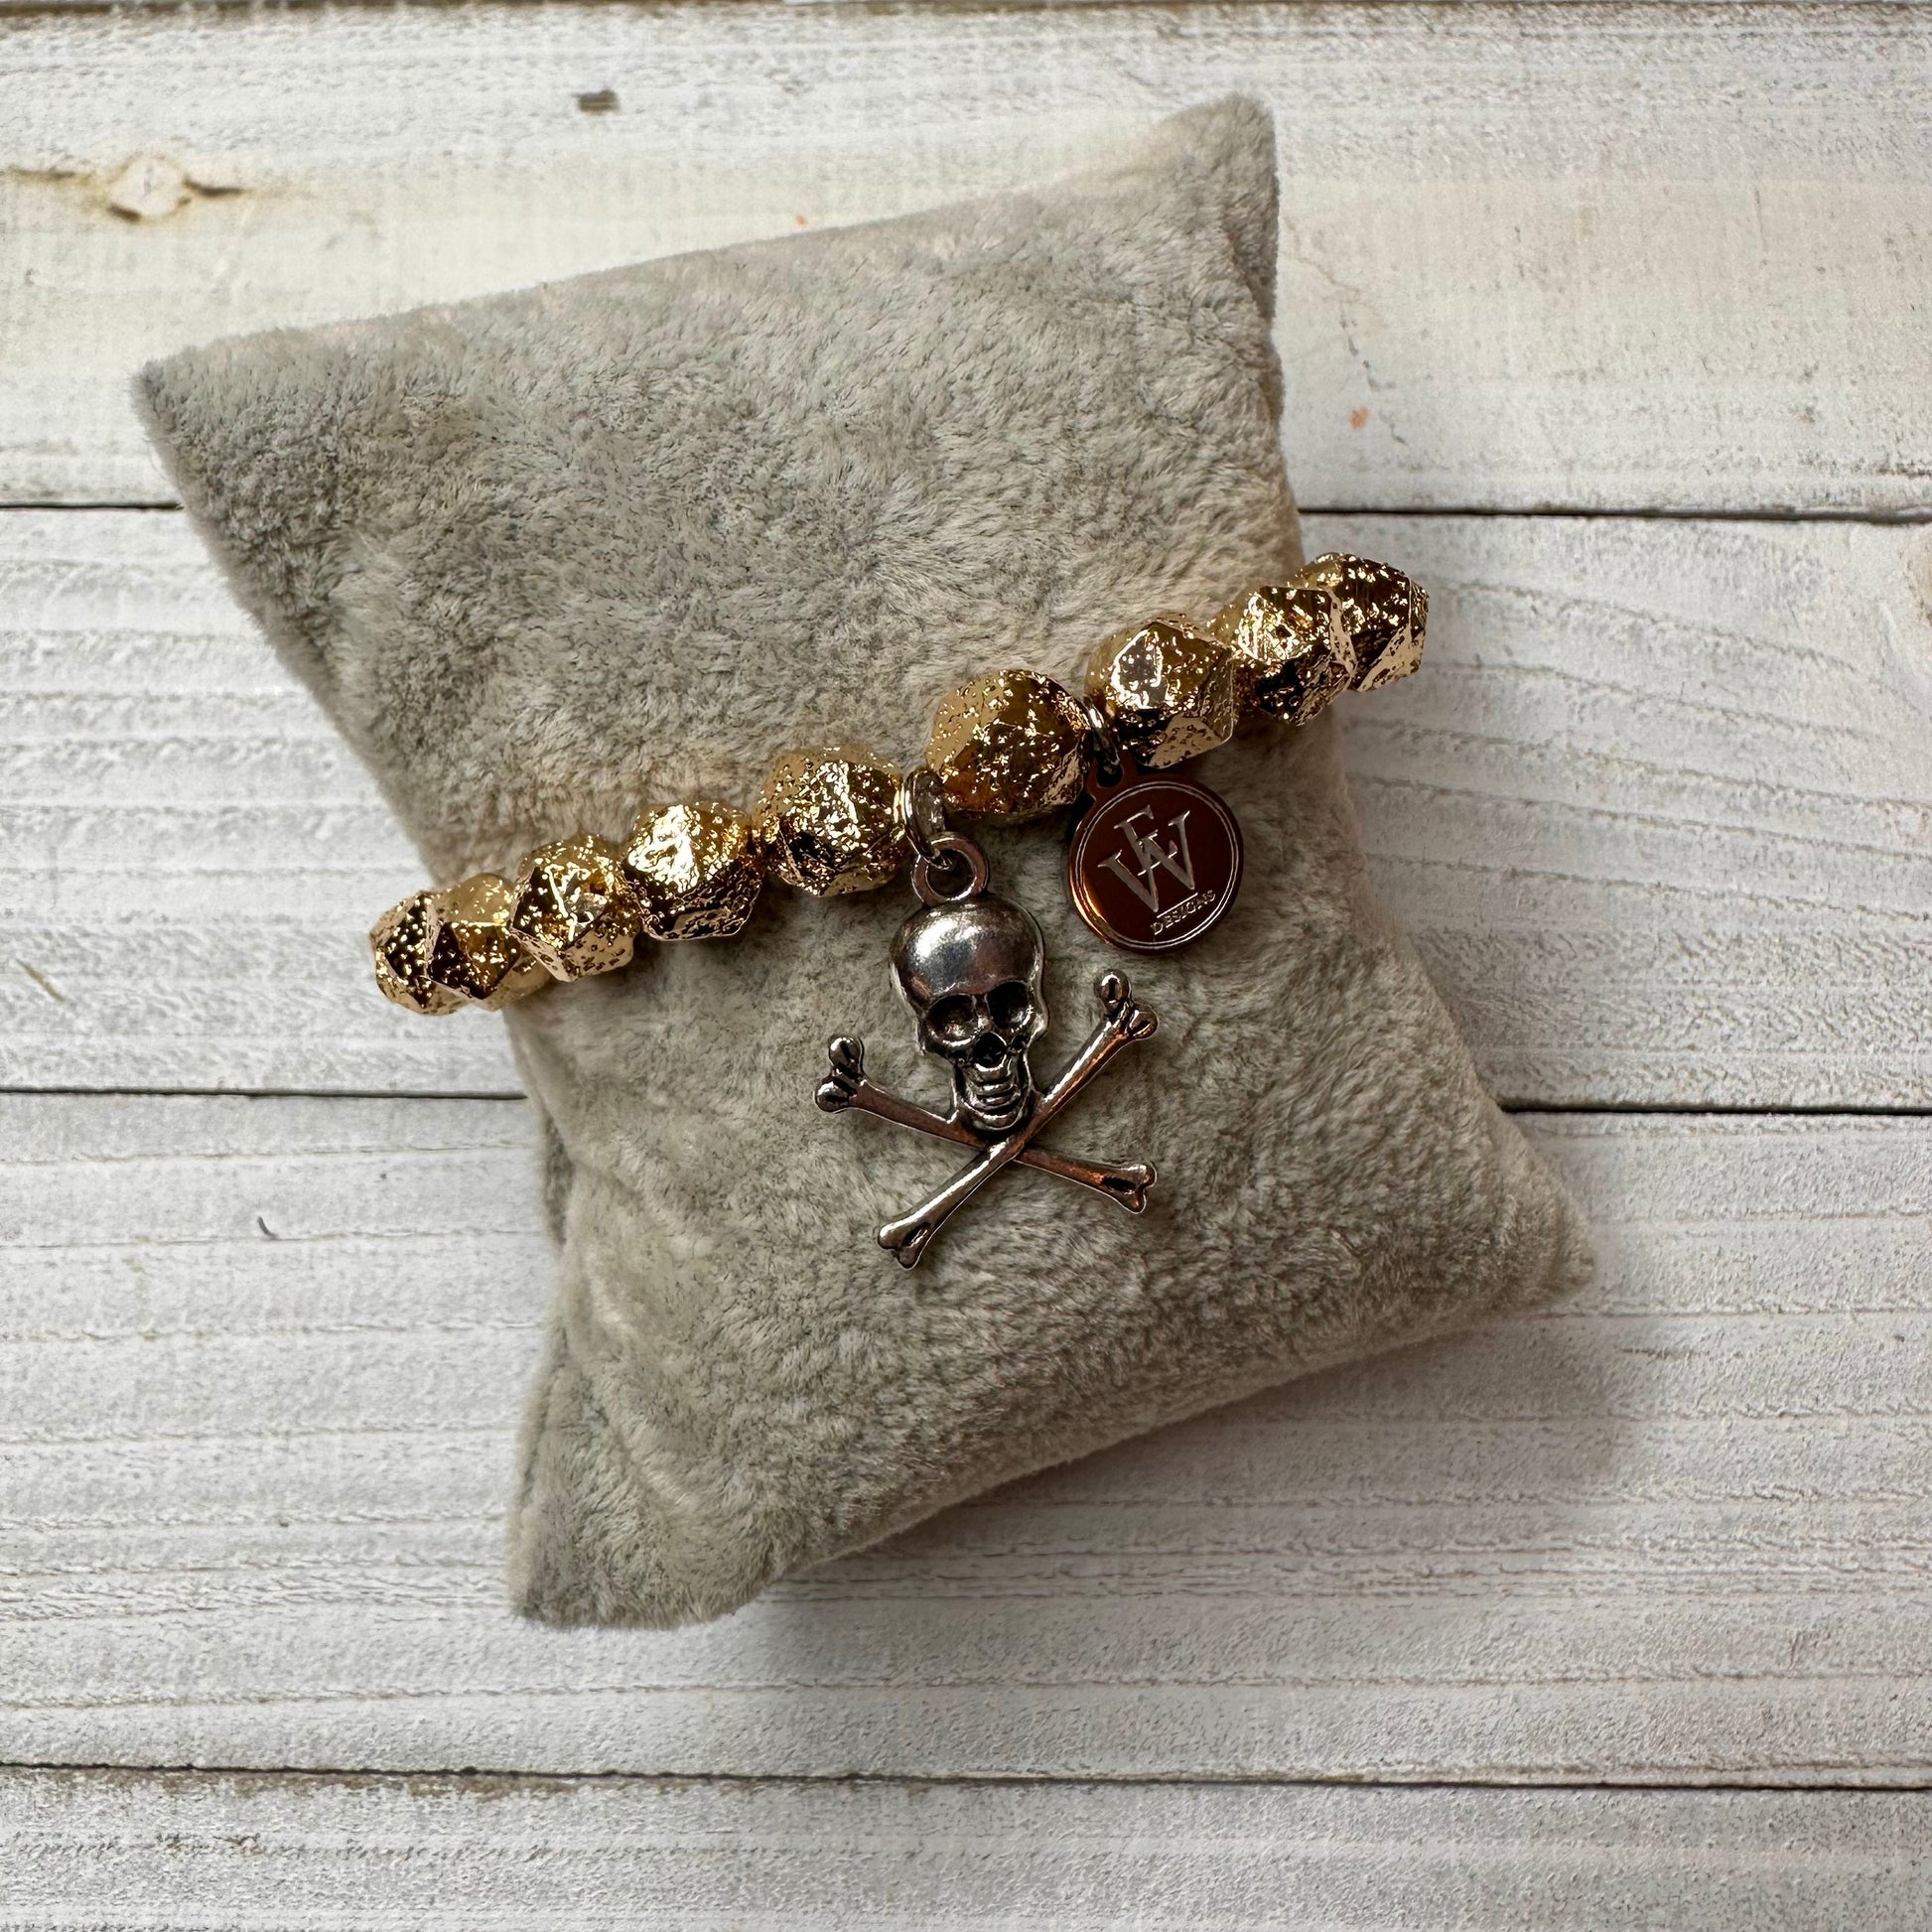 Faceted Gold Plated Hematite Beads Bracelet with a Metal Crossed Bones and Skull Charm